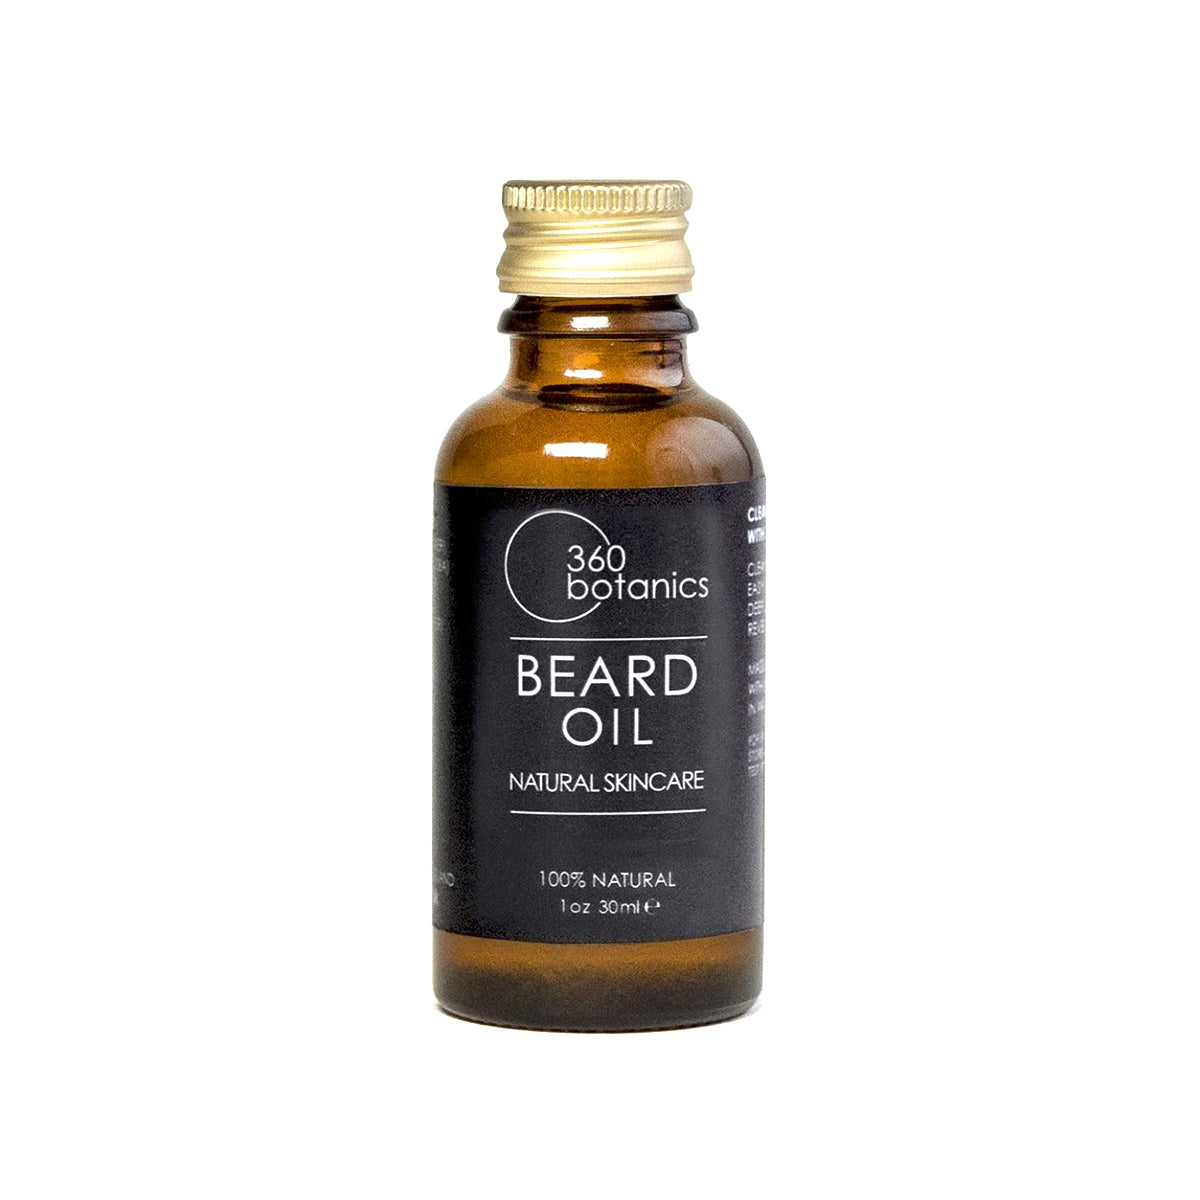 A 1 oz (30 ml) bottle of 360 Botanics Beard Oil with a metallic cap, labeled as "Natural Skincare" and "100% Natural," against a white background.